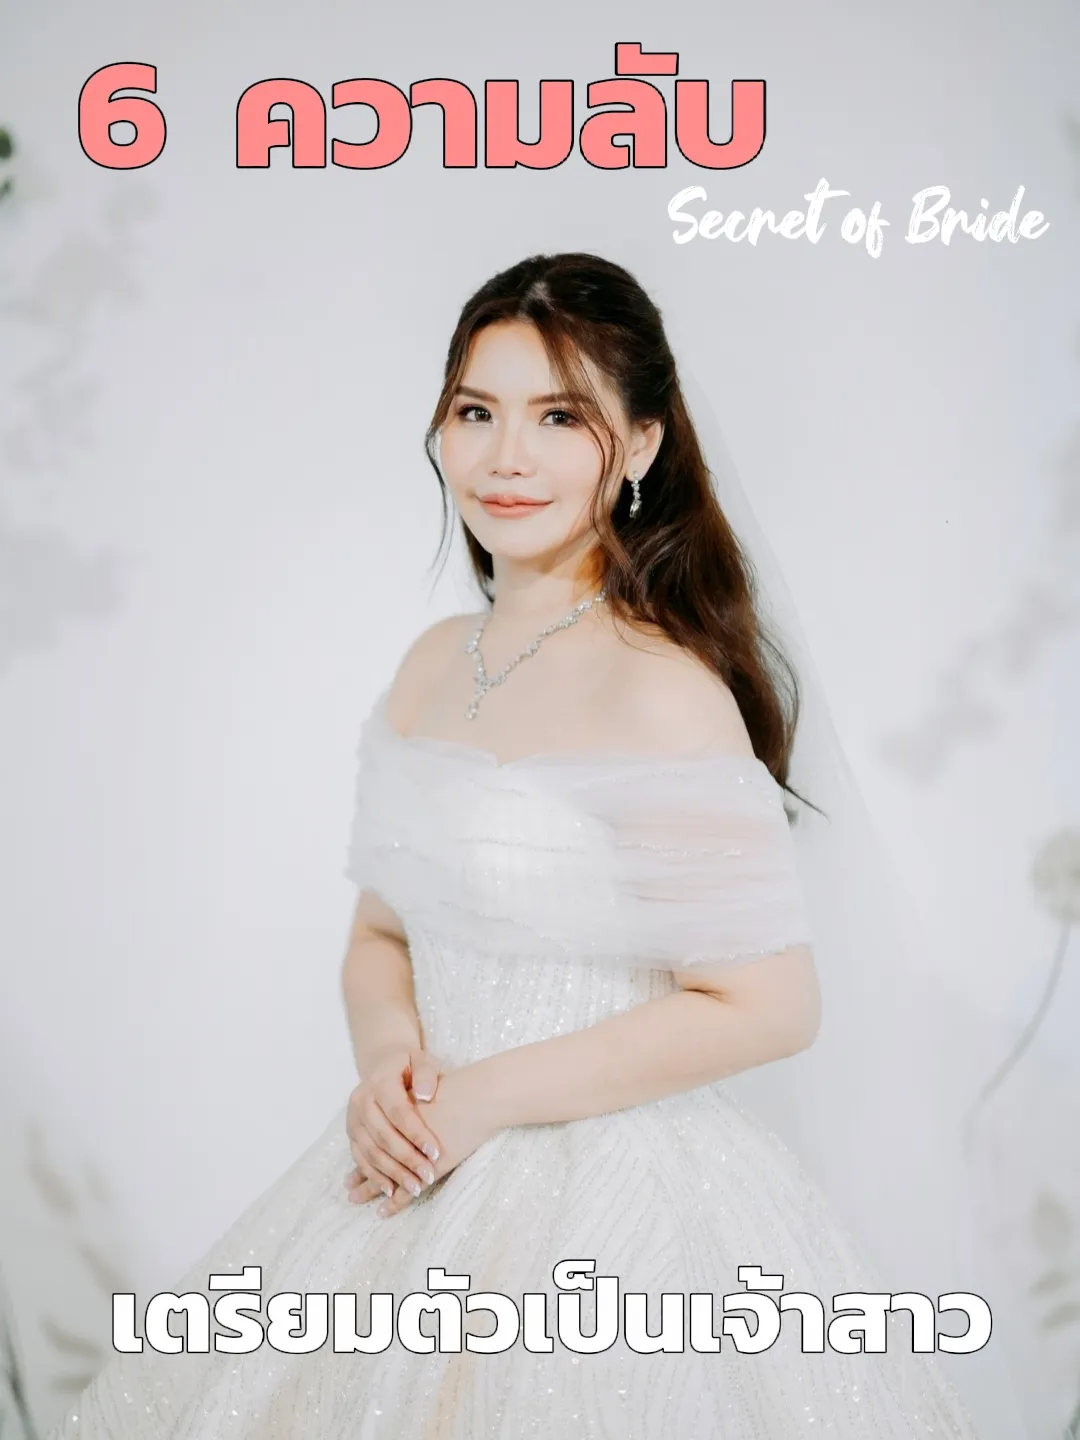 Introducing SR BRIDAL 👰‍♀️ A secret project we've been working